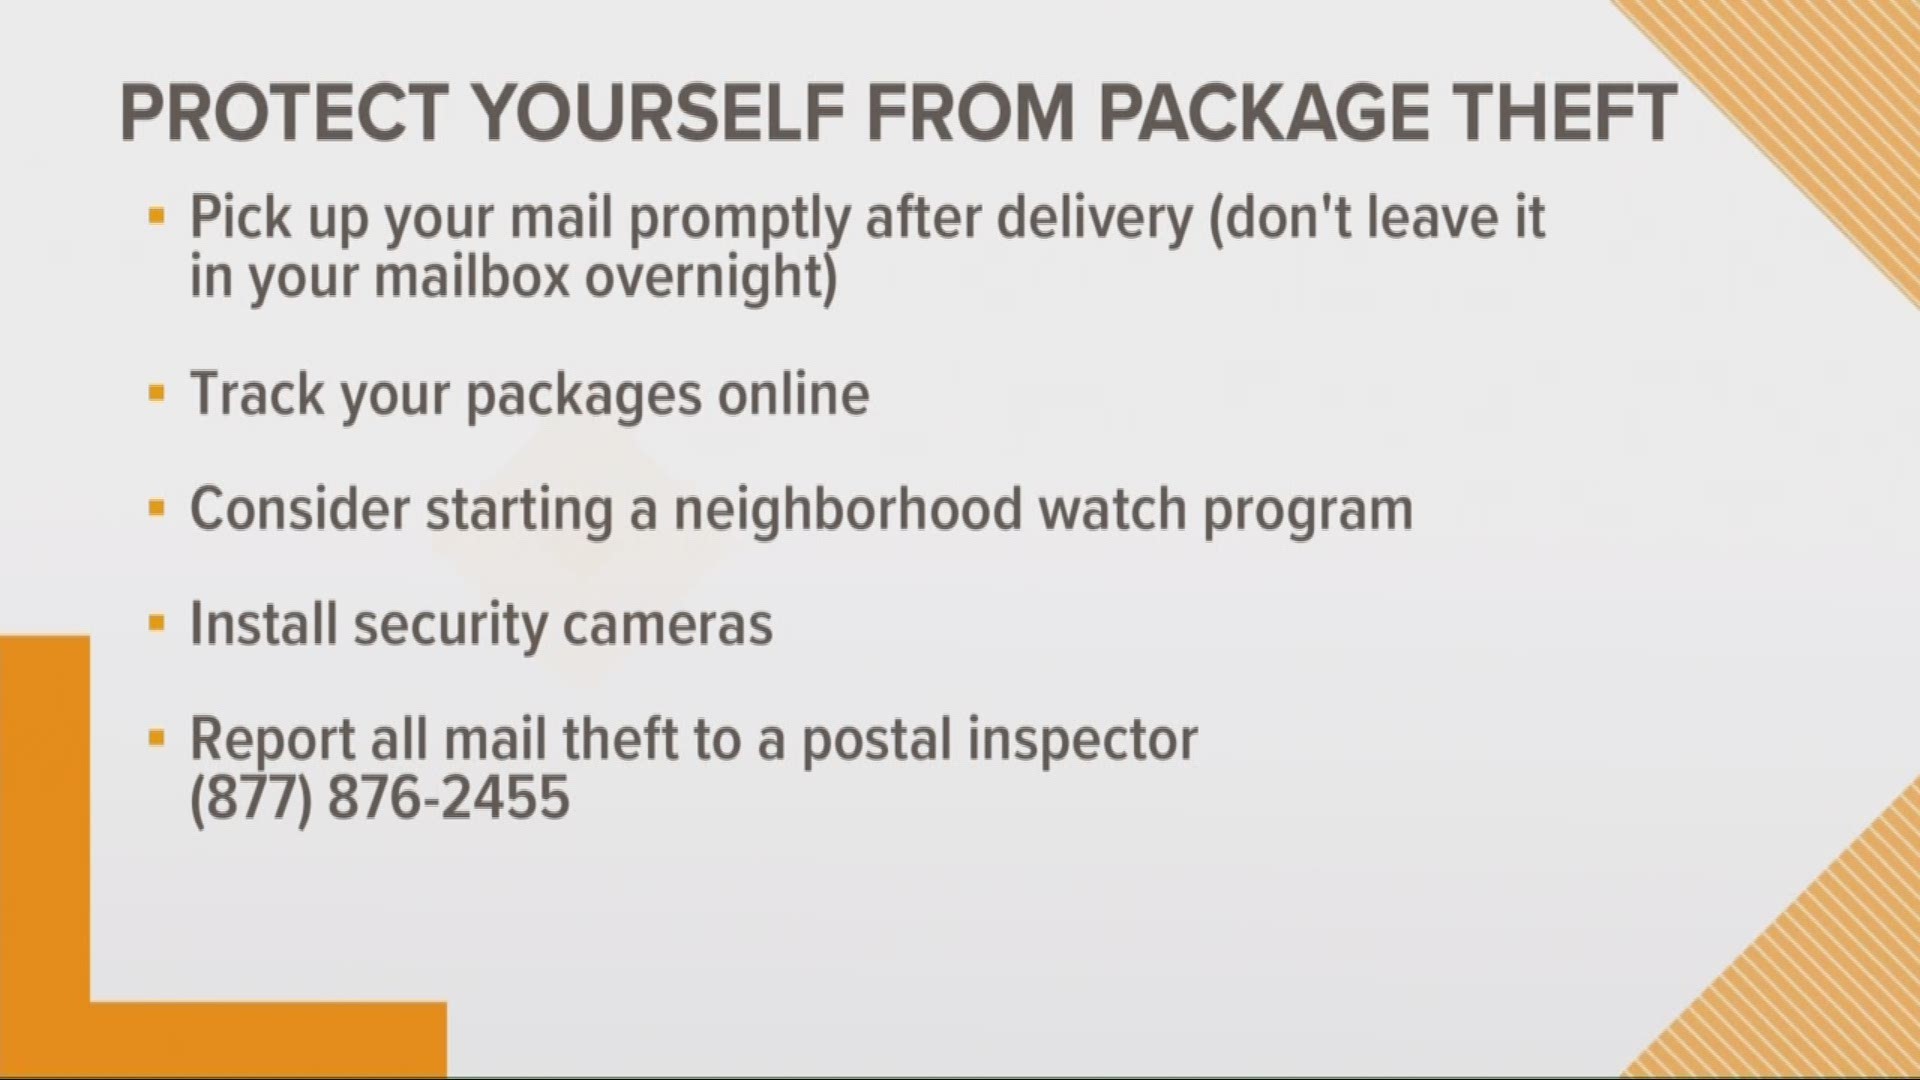 Carlos and Ariane give viewers tips on how to protect their packages from theft.